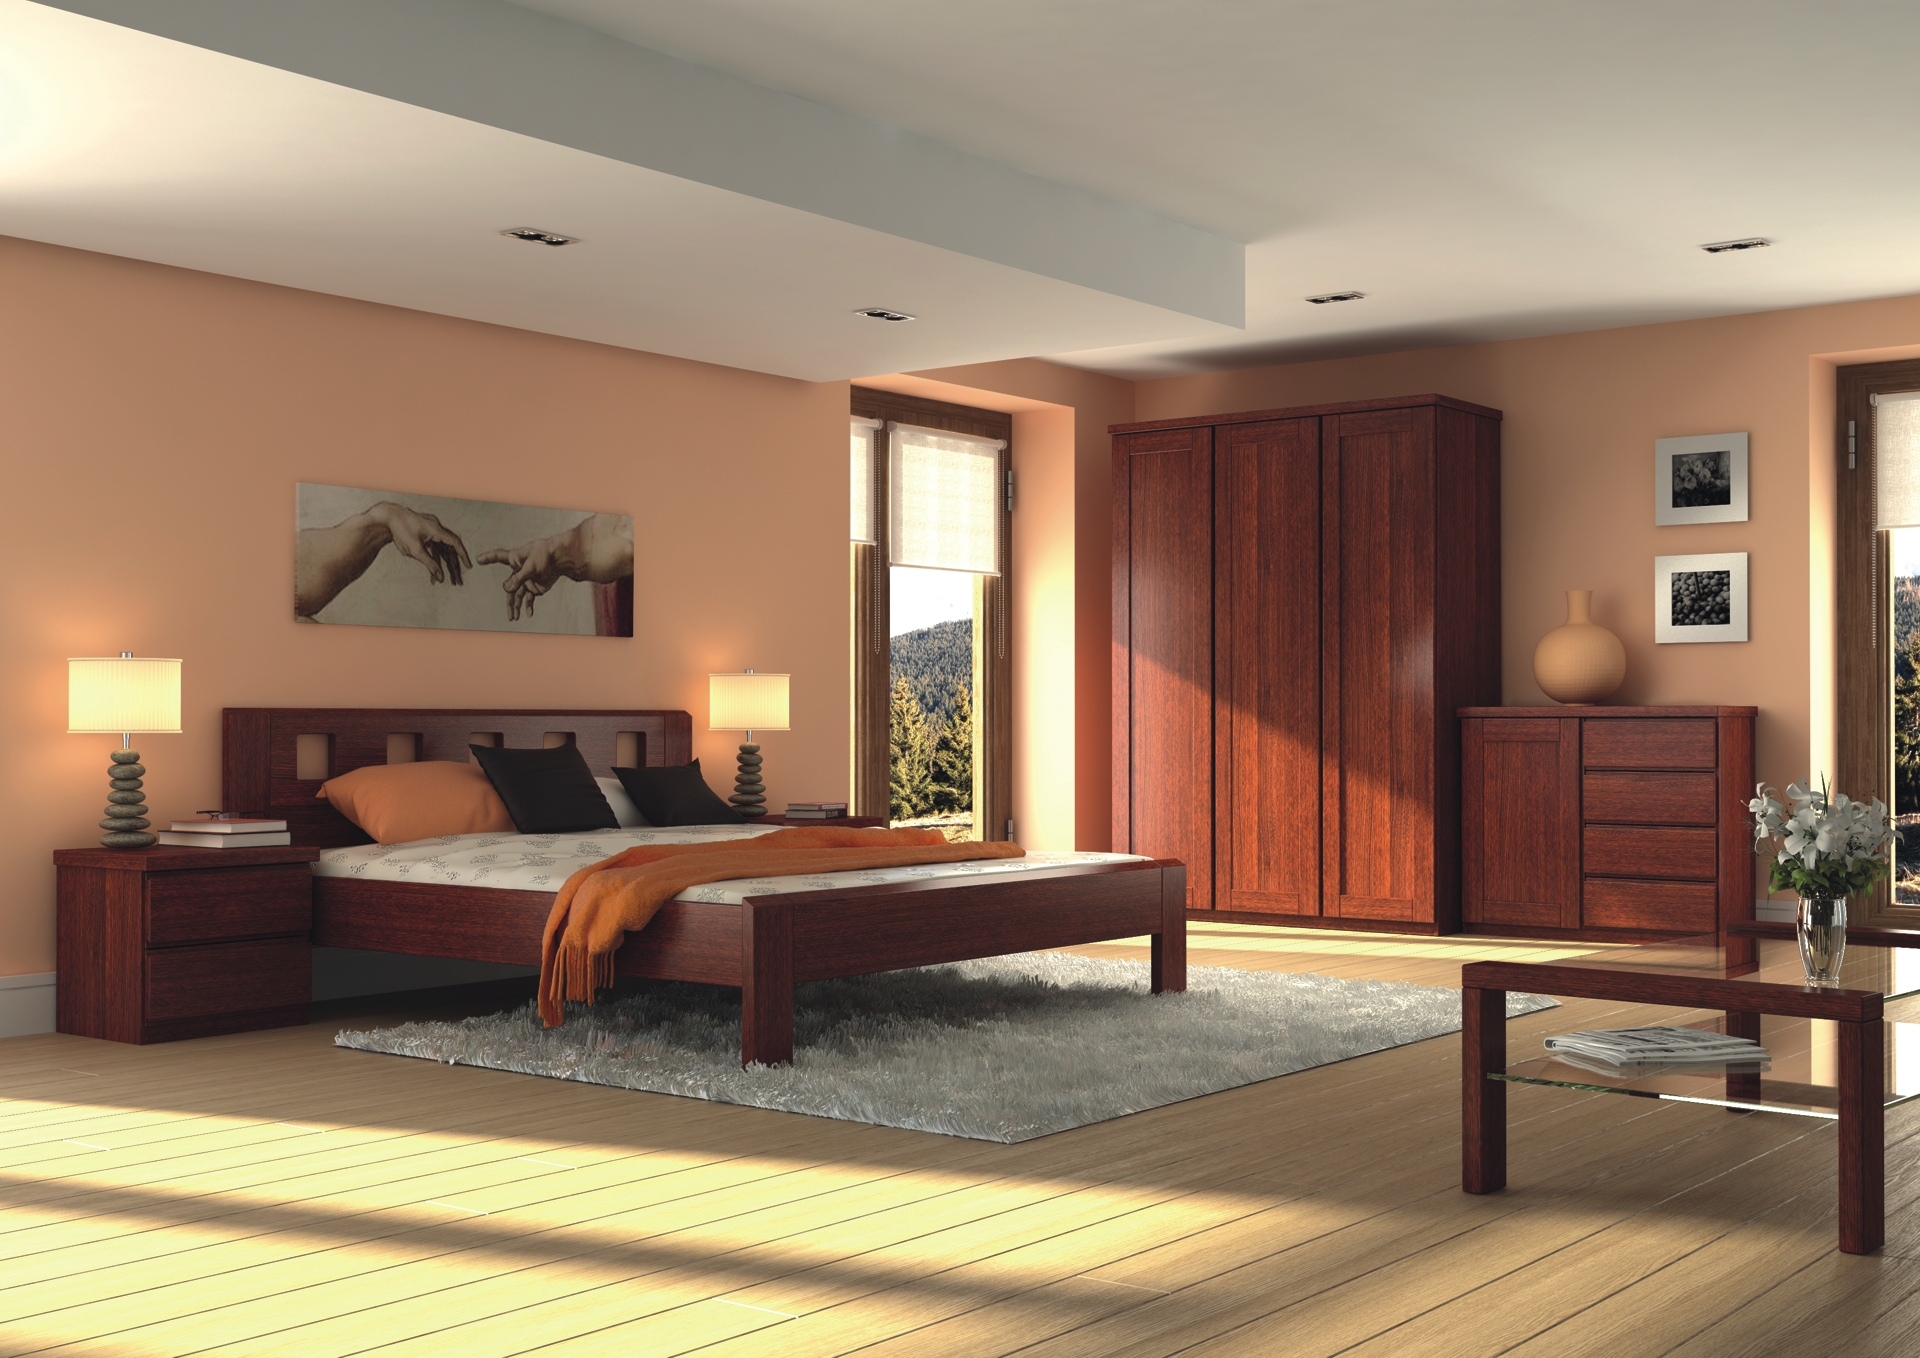 The benefits of a solid wood bedroom